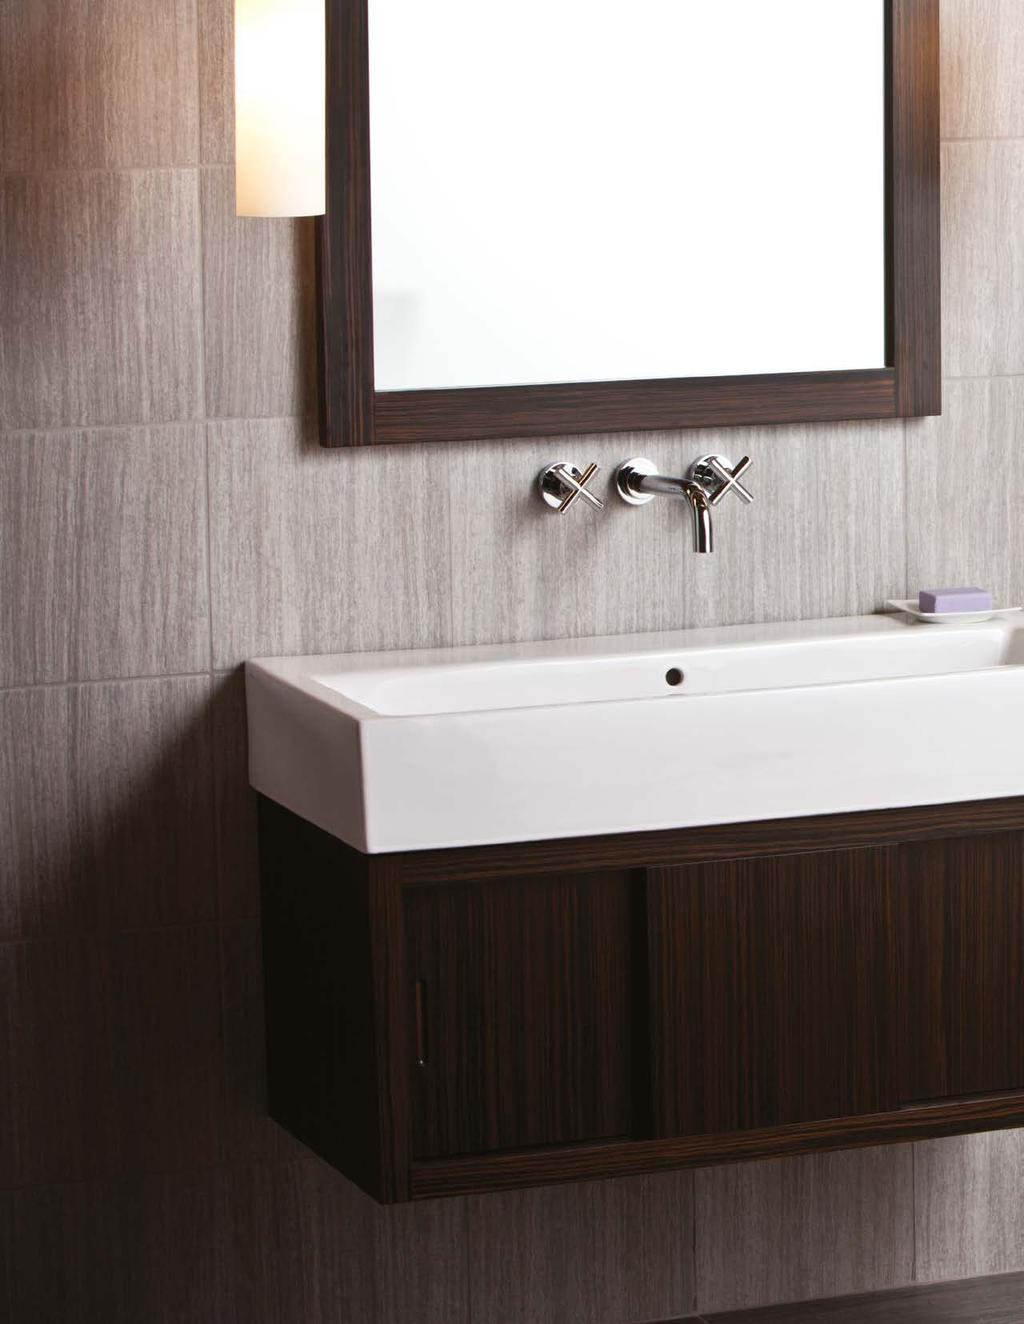 Geberit 2100 S. Clearwater Drive Des Plaines, IL 60018 USA P 800-566-2100 F 847-803-5454 geberit.us www.geberitnow.